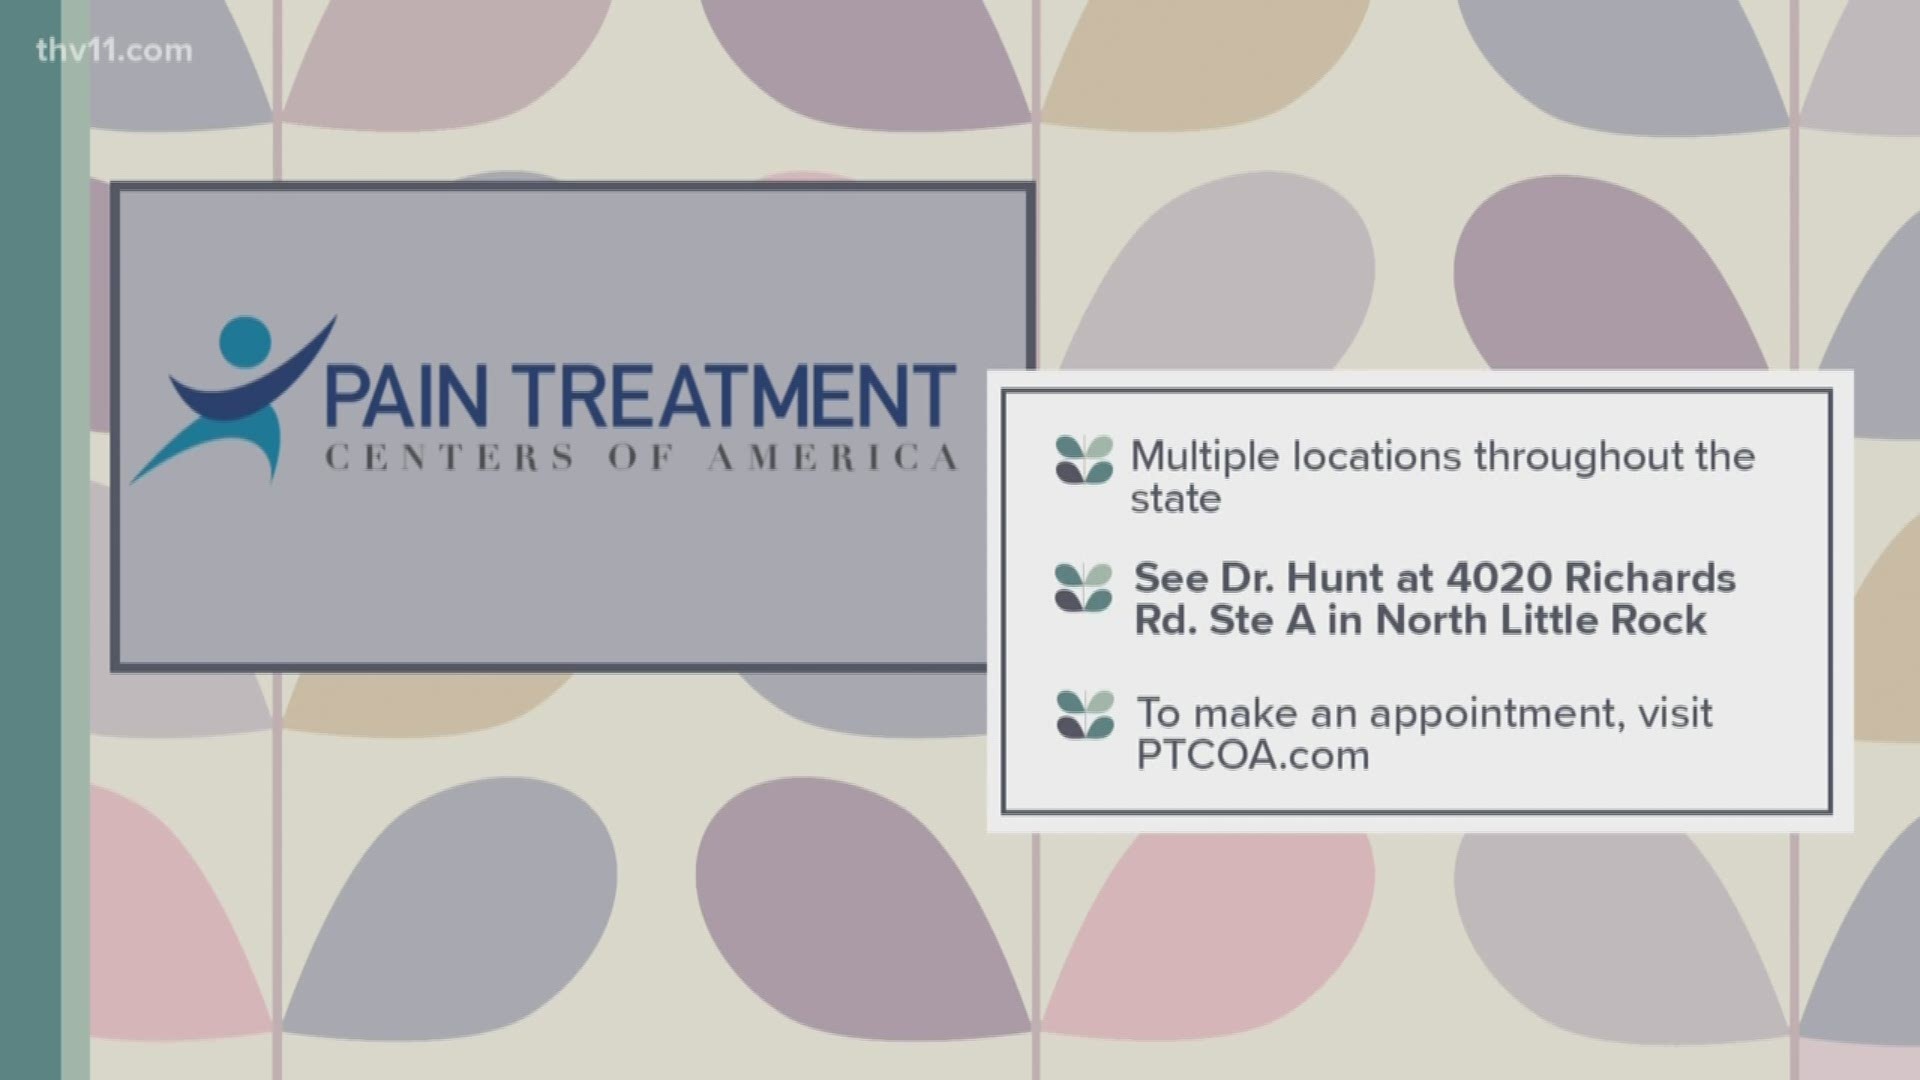 Pain Treatment Centers of America is Arkansas' largest comprehensive management practice, with multiple locations around the state.